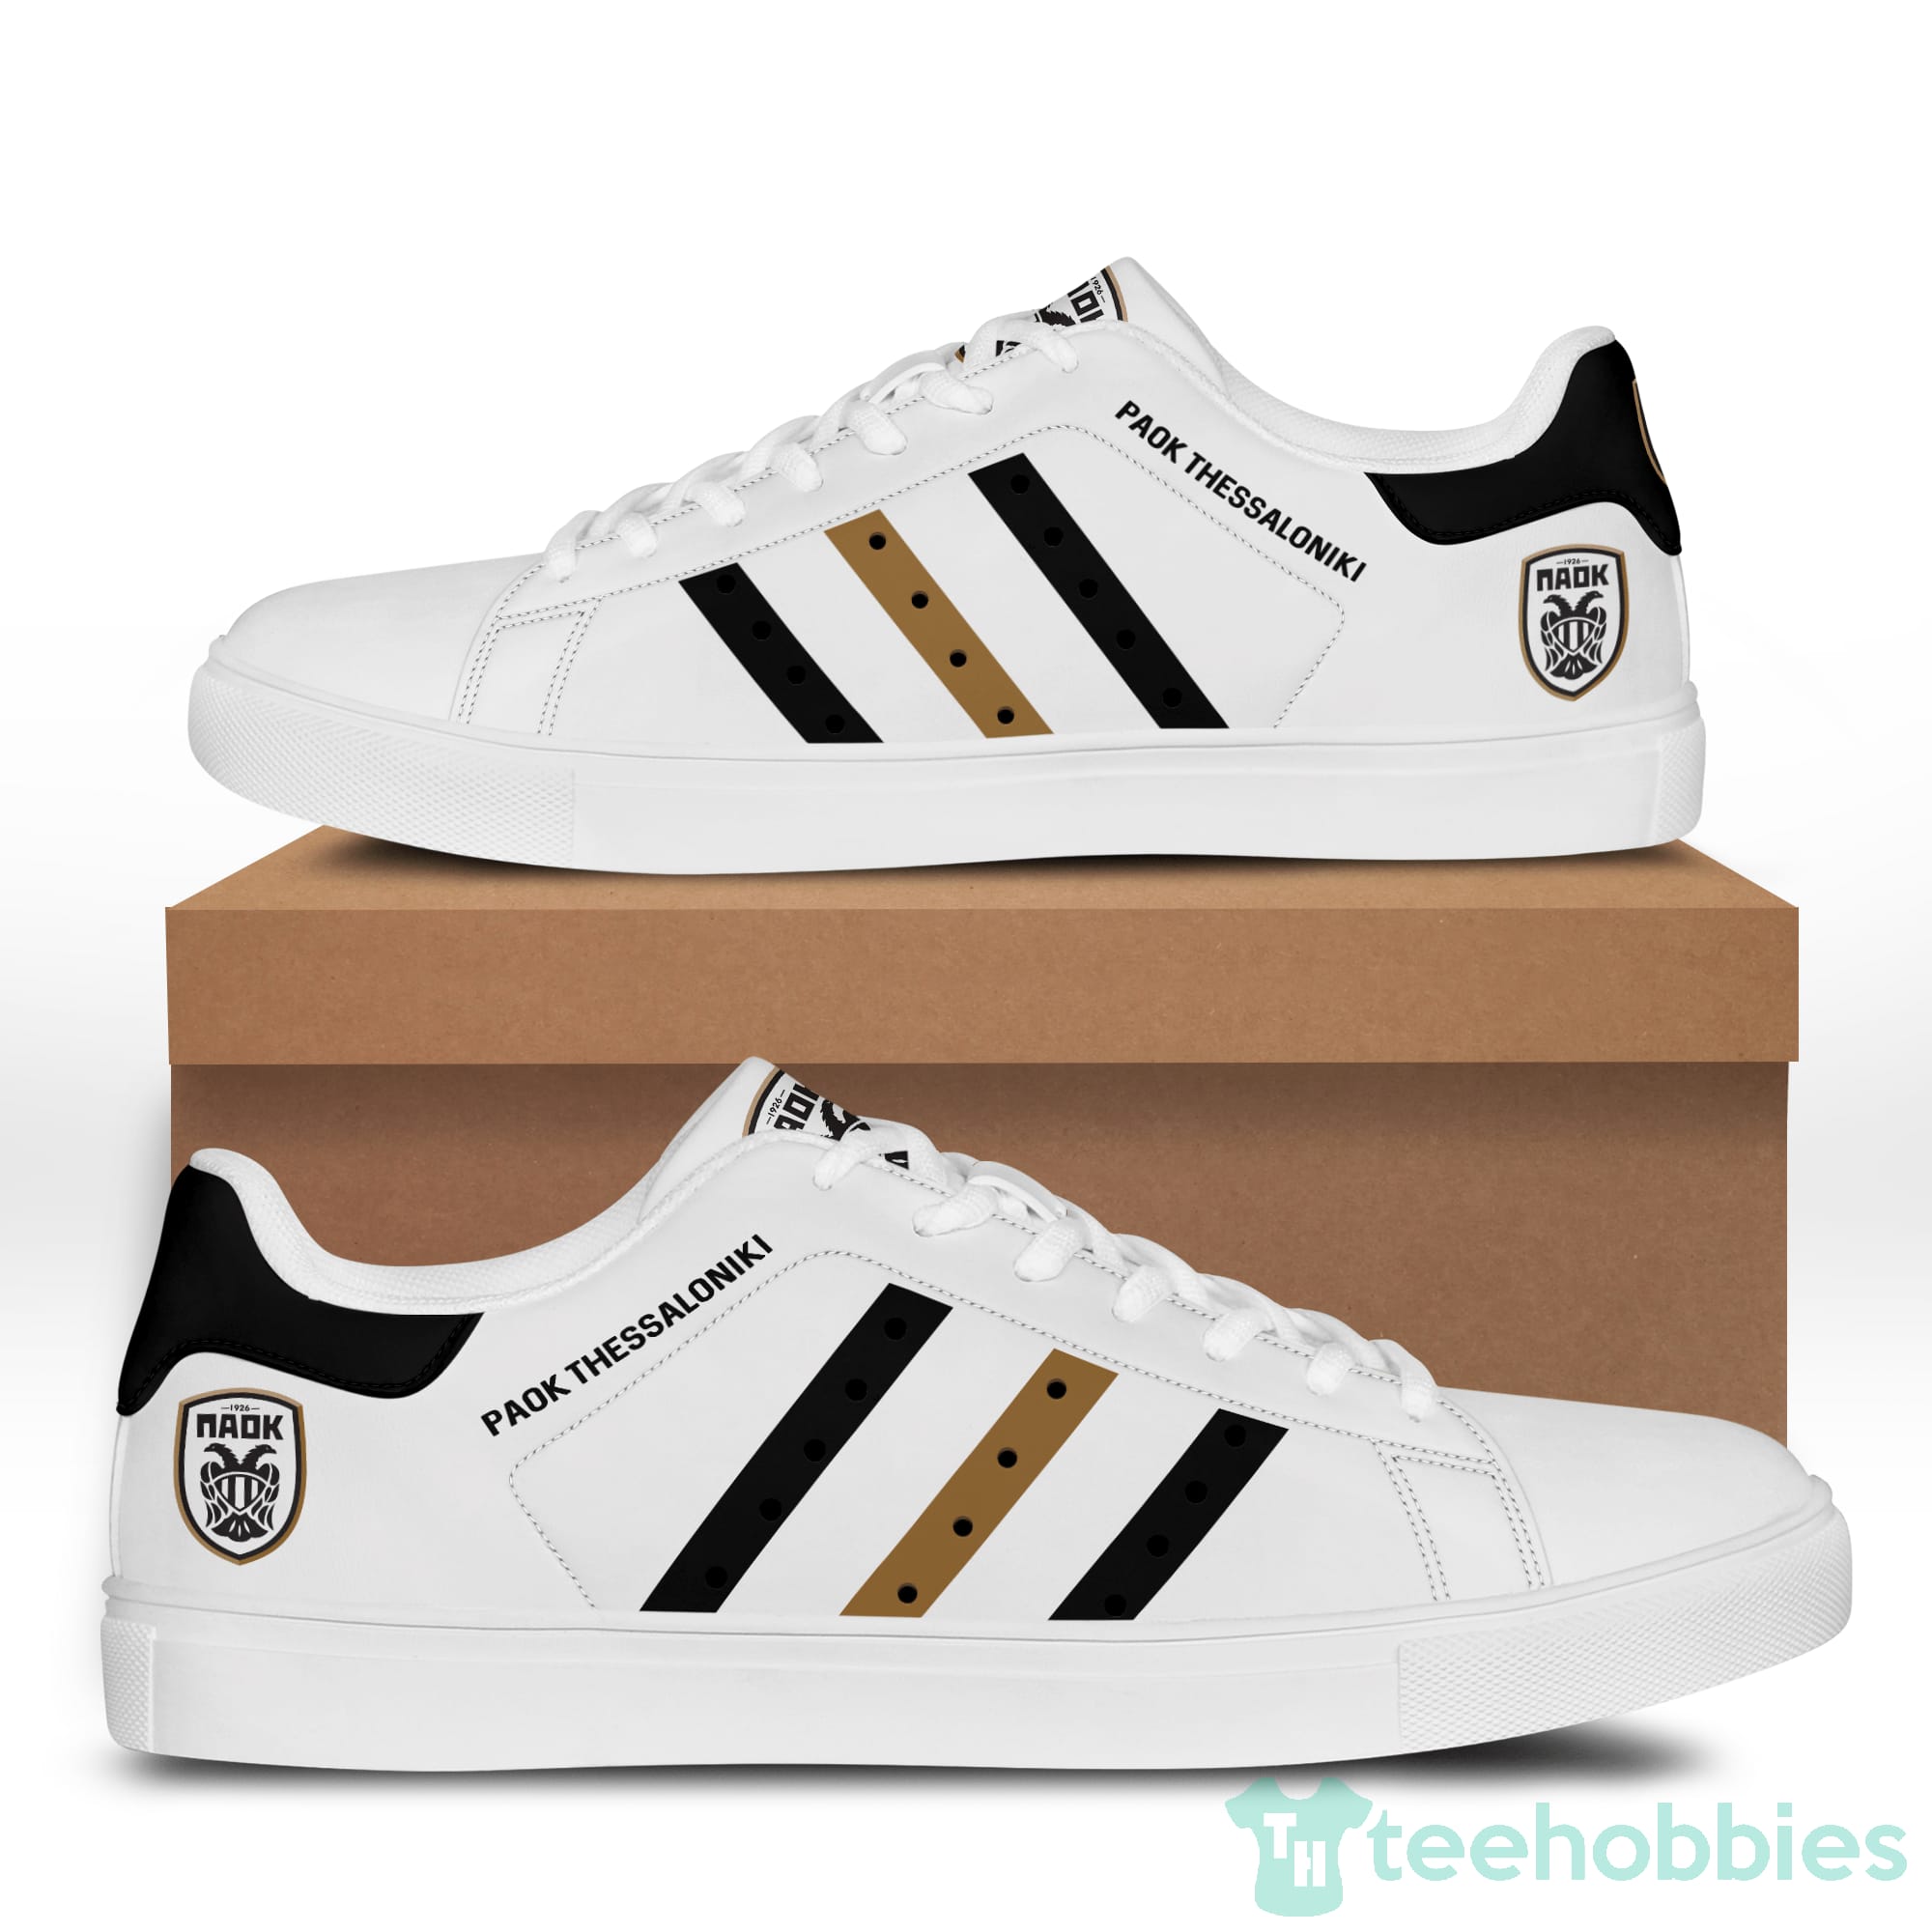 Paok Thessaloni Fc Low Top Skate Shoes Product photo 1